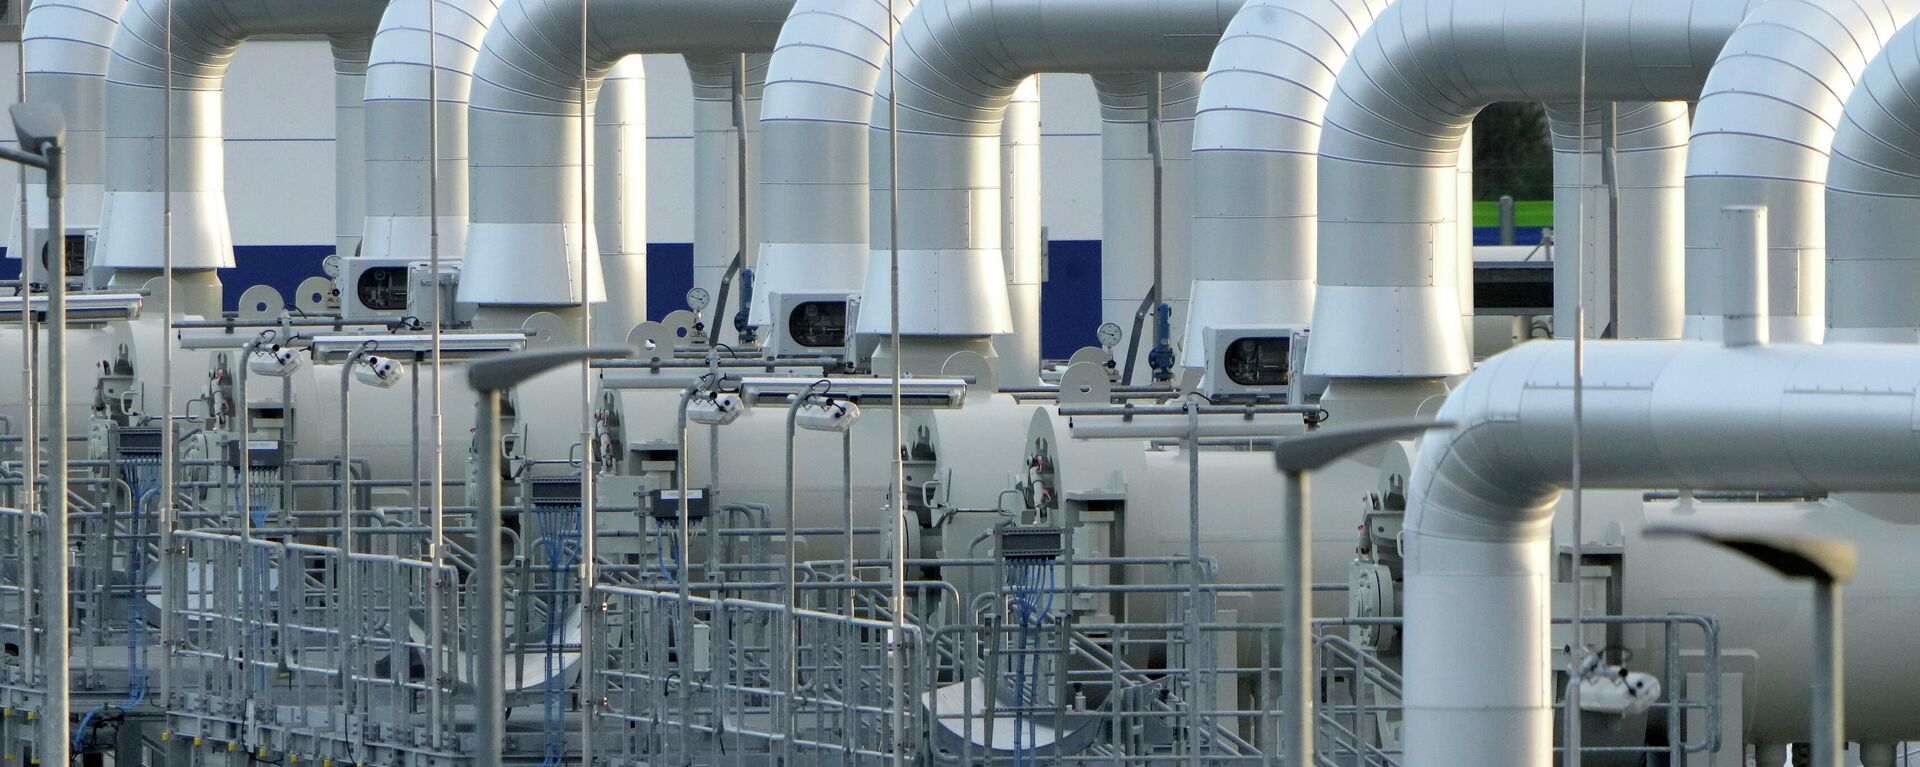 FILE - Pipes at the landfall facilities of the 'Nord Stream 2' gas pipline are pictured in Lubmin, northern Germany, Tuesday, Feb. 15, 2022 - Sputnik International, 1920, 15.12.2022